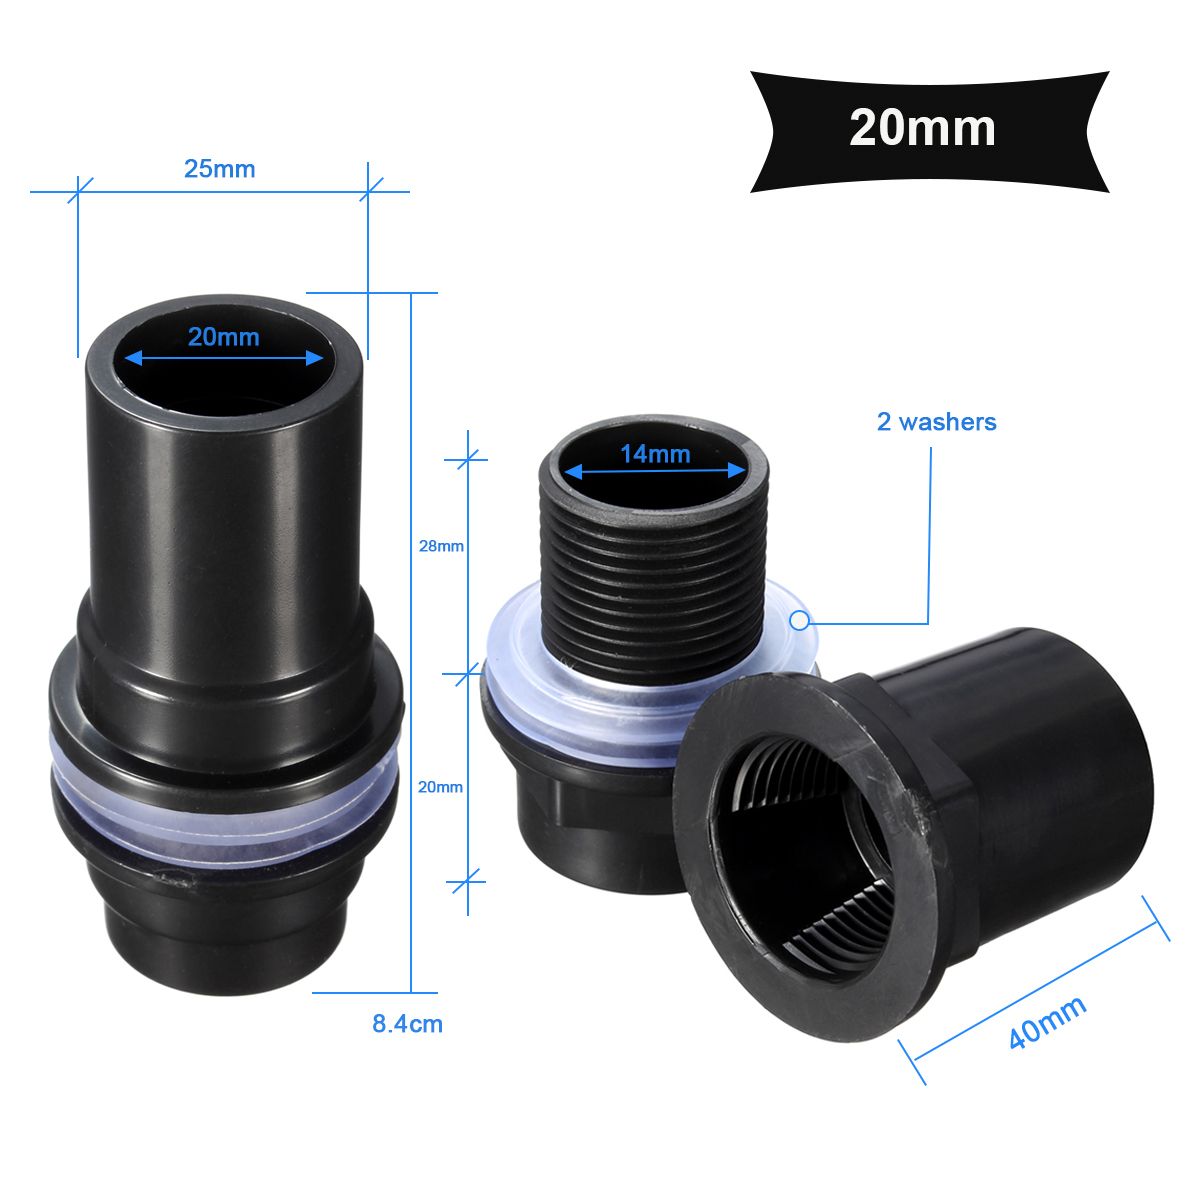 Aquarium-PVC-Connector-Plastic-PVC-Pipe-Butt-Fish-Tank-Straight-Up-Pipe-Fitting-Joint-Connection-1259908